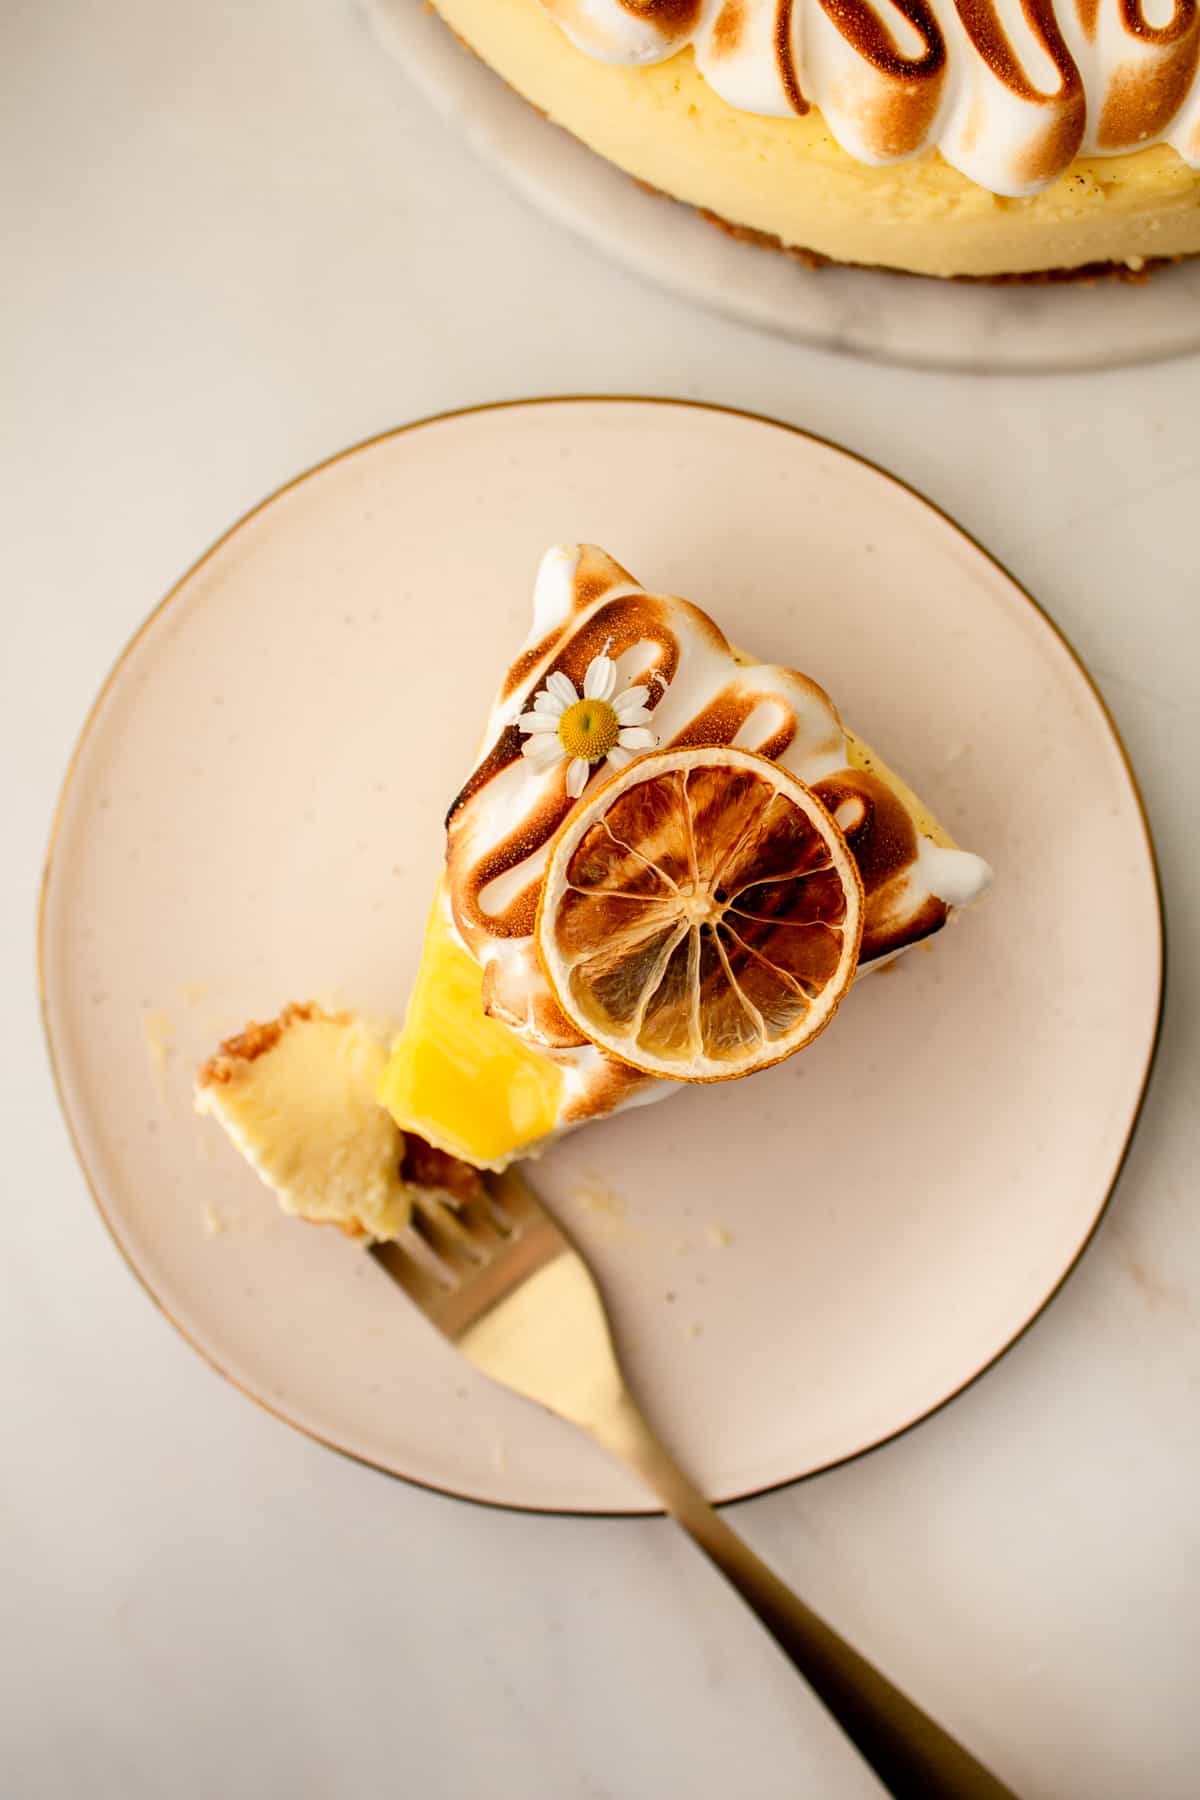 slice of lemon meringue cheese cake with a bite taken out